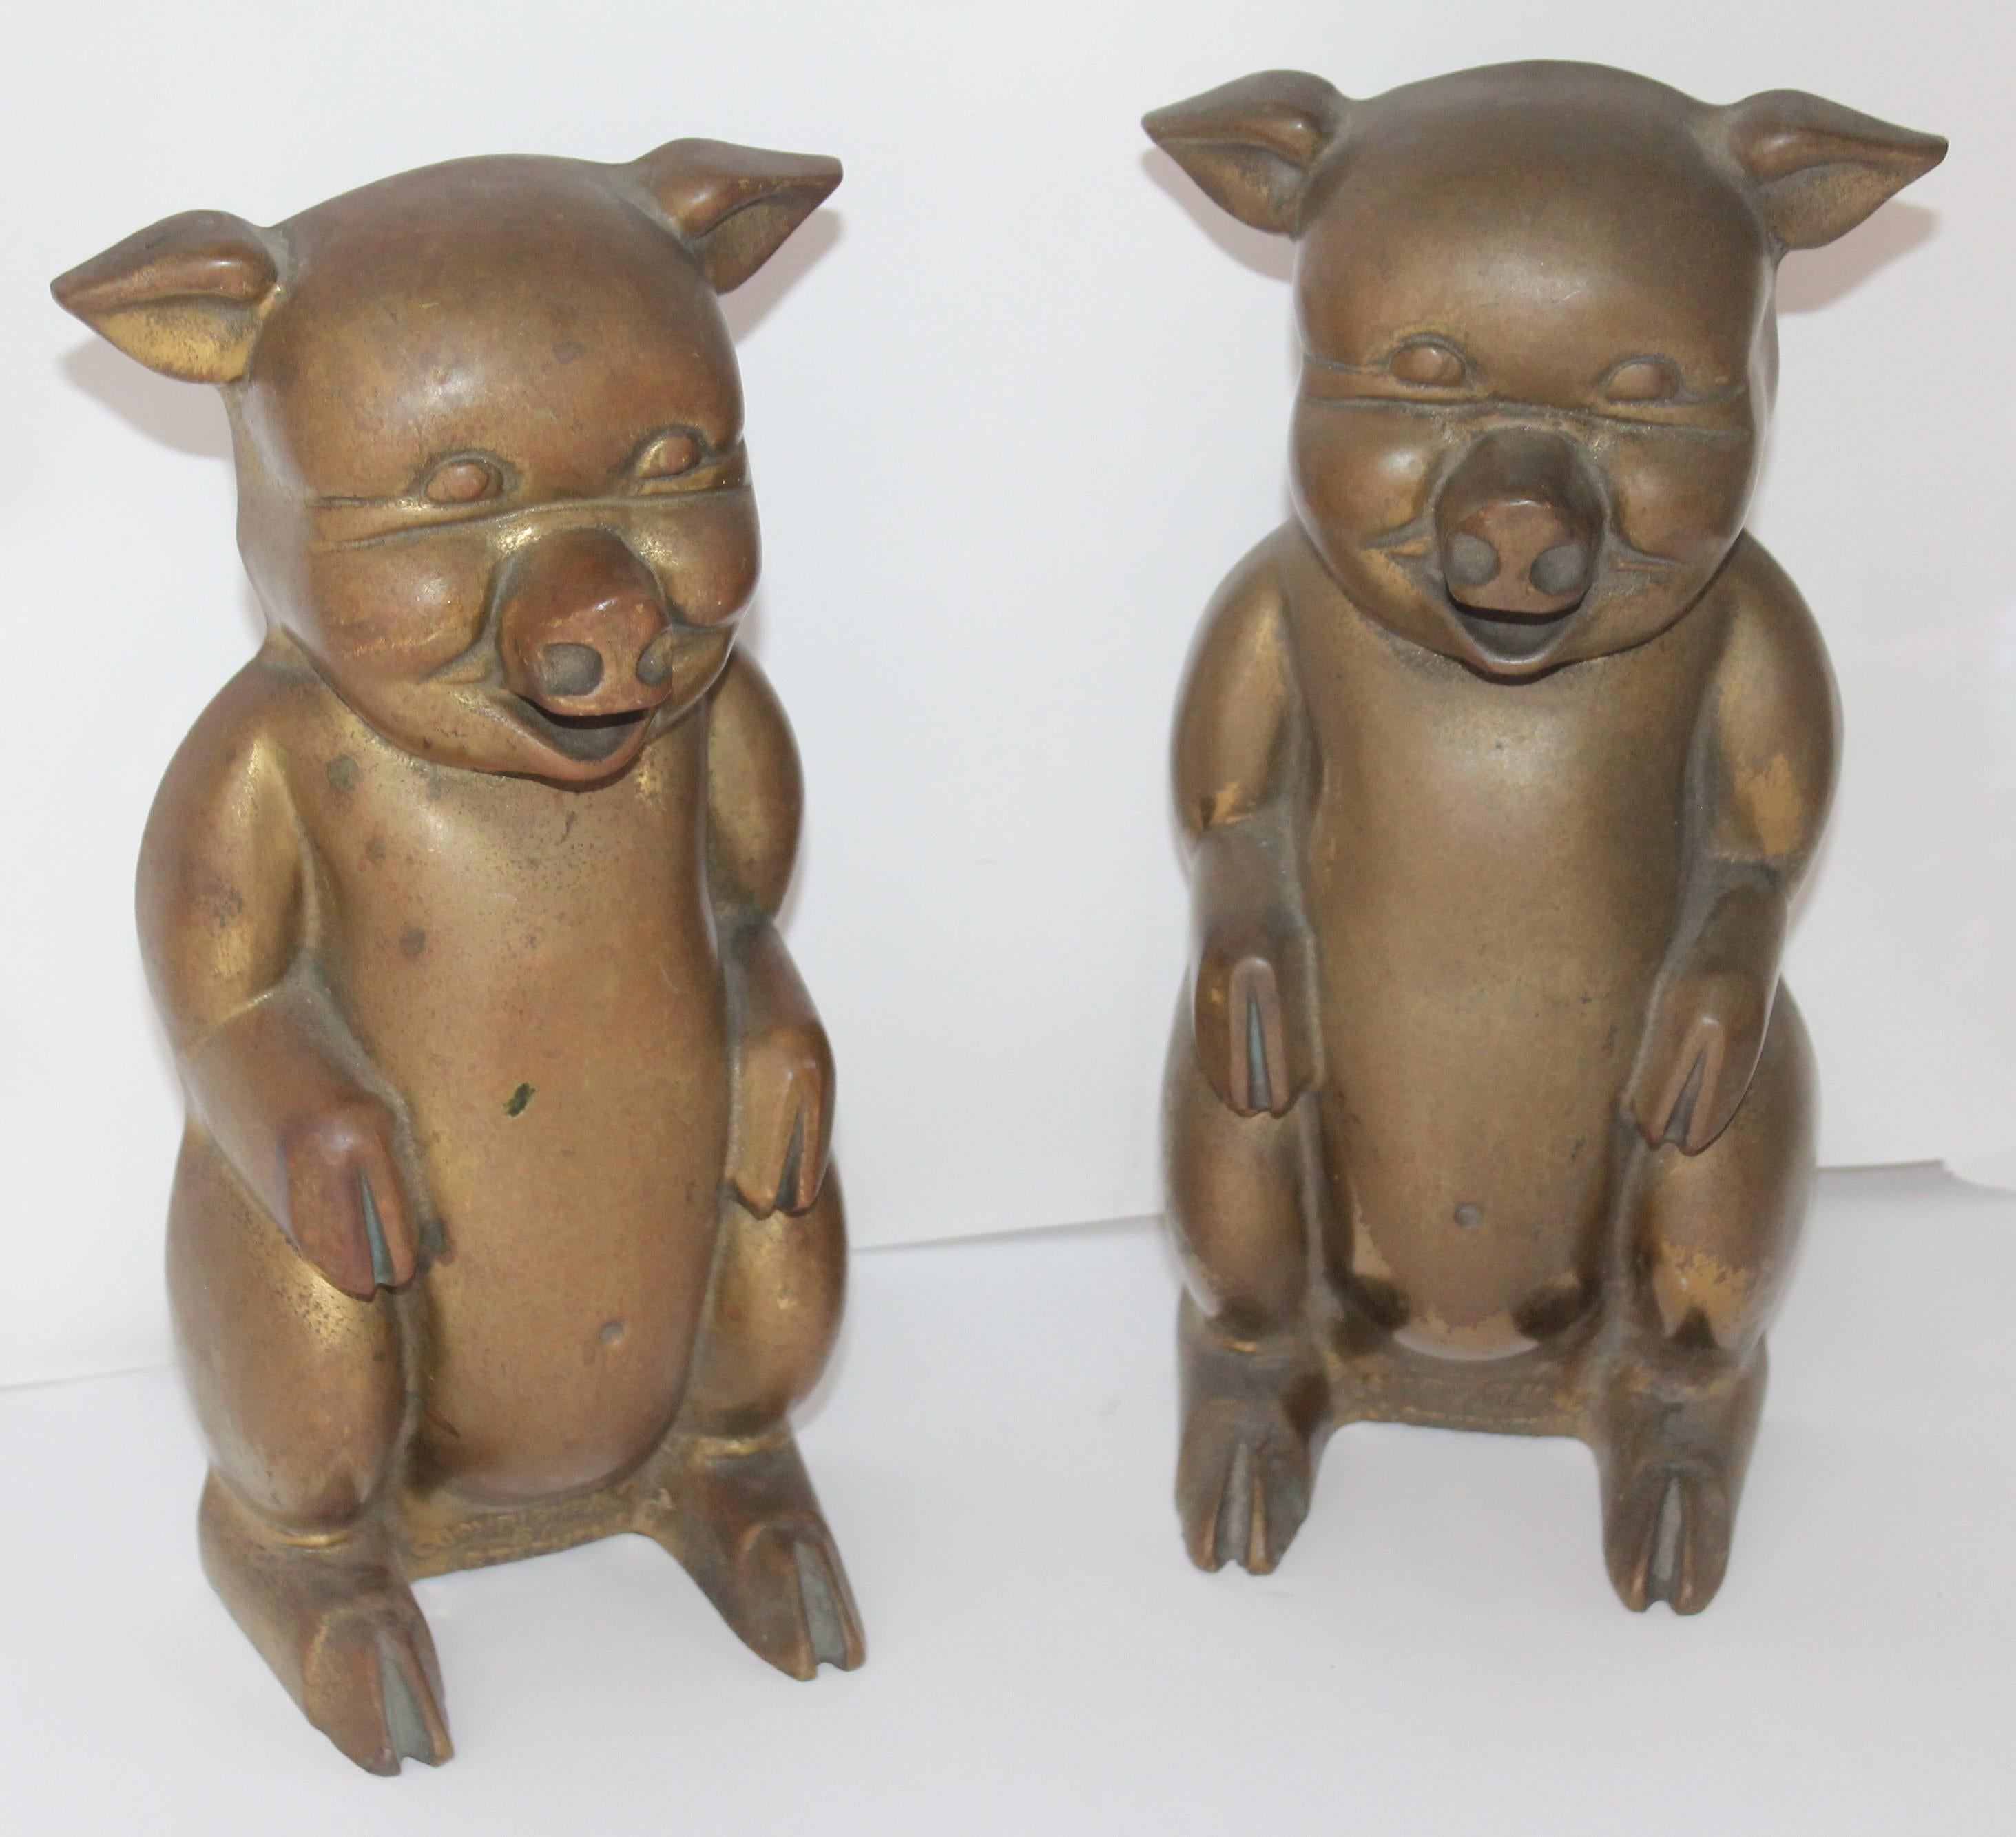 These two big pigs could even be doorstops as they are tall and heavy. They have a nice mellow patina / surface. They are in great condition and are signed and dated. Stephens copyright 1946. So fun and wild. Patinaed.